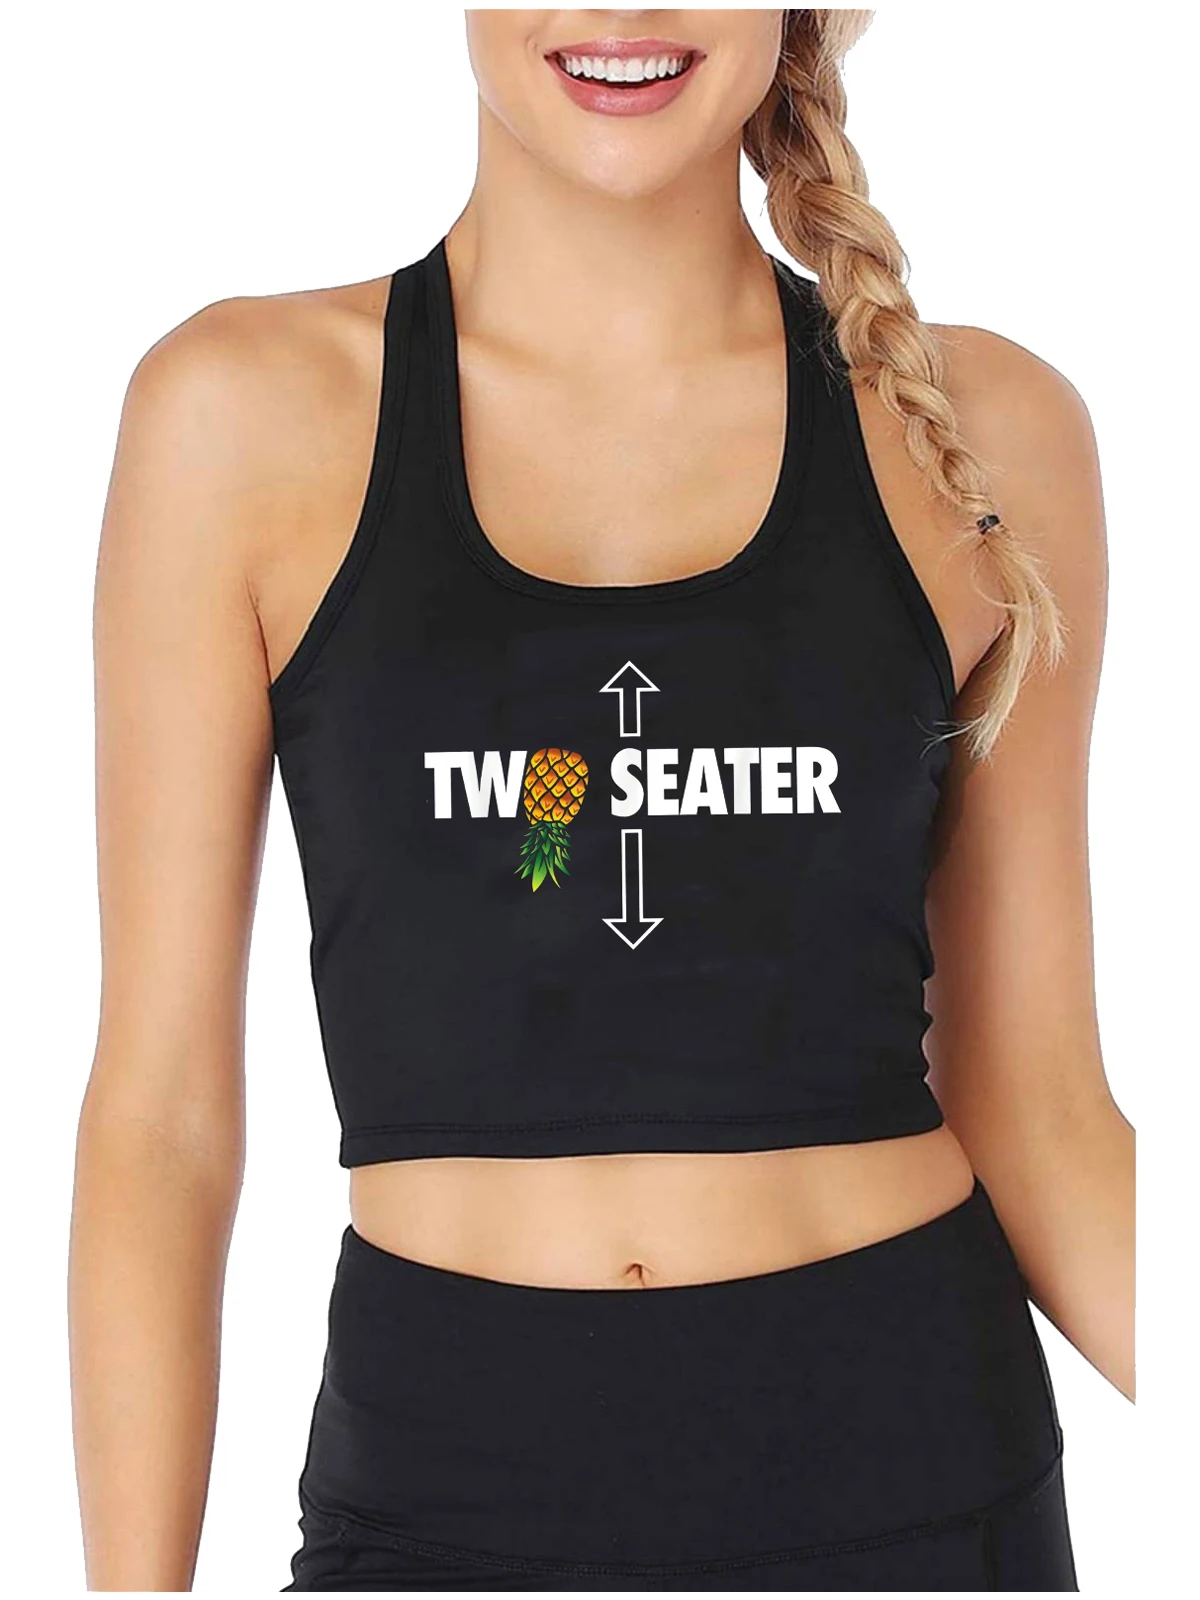 

Two Seater Design Sexy Slim Fit Crop Top Swinger Funny Upside Down Pineapple Graphic Tank Tops Hotwife Creative Naughty Camisole